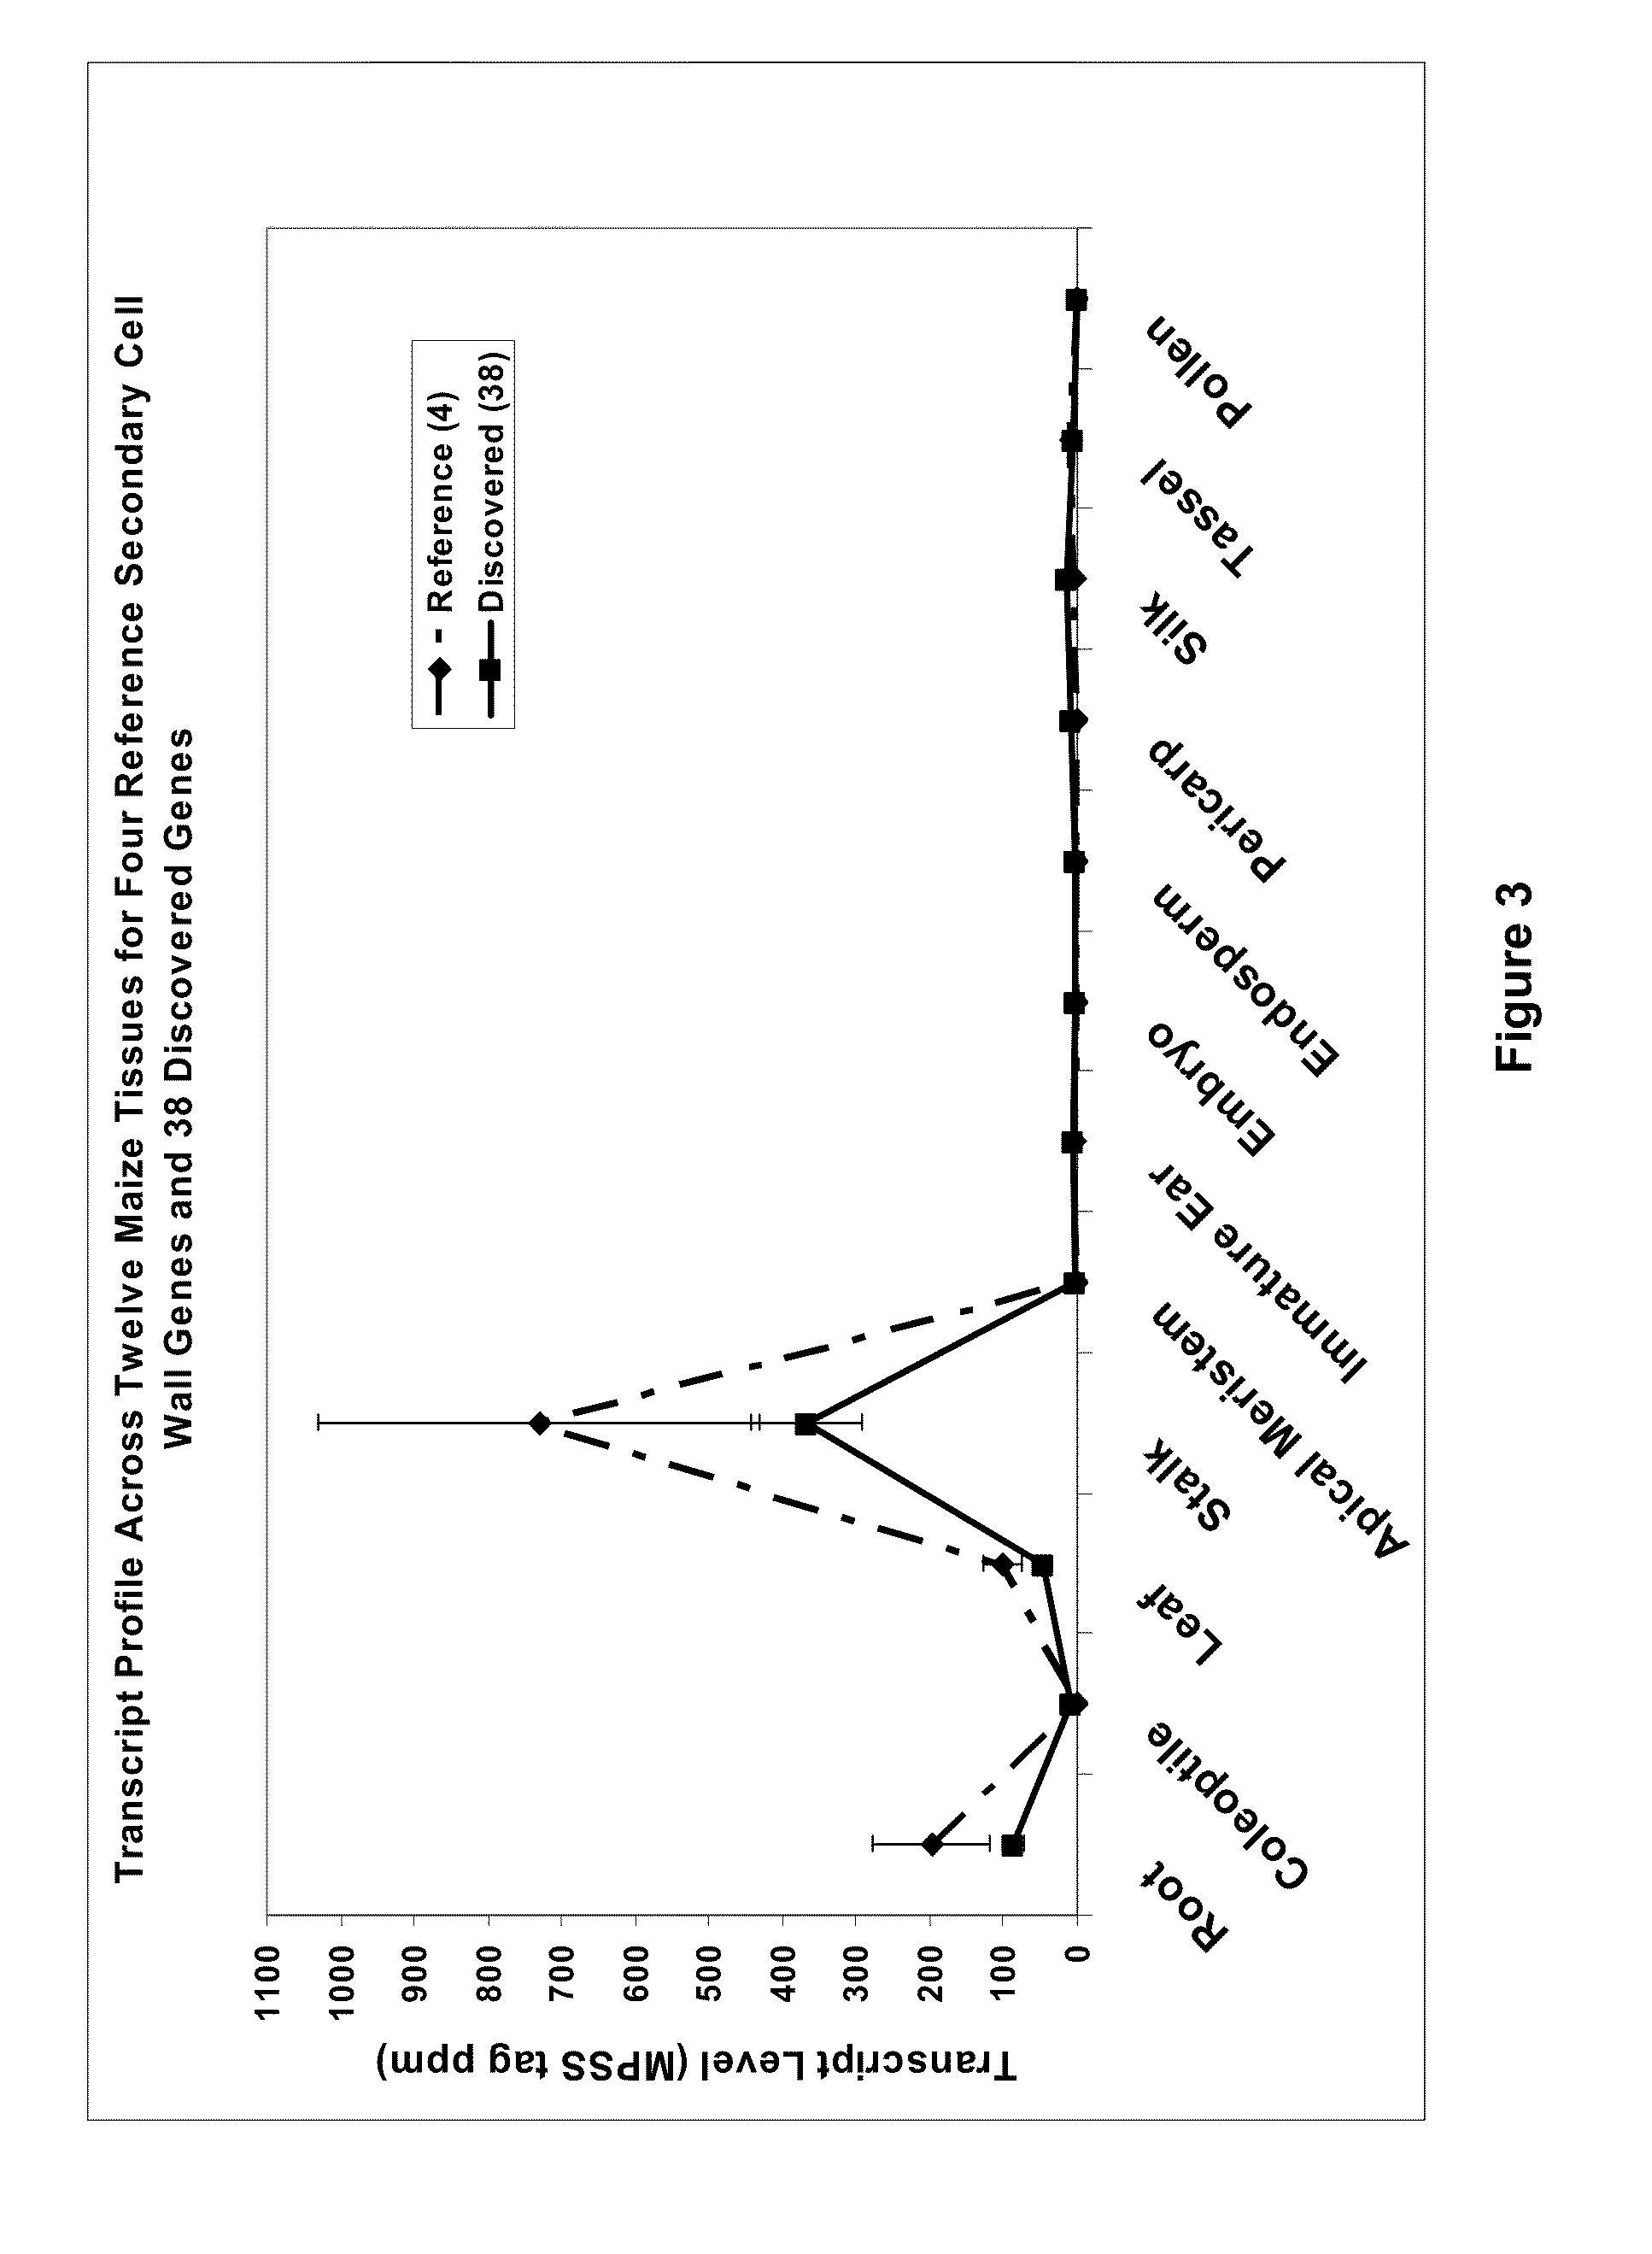 Secondary wall forming genes from maize and uses thereof